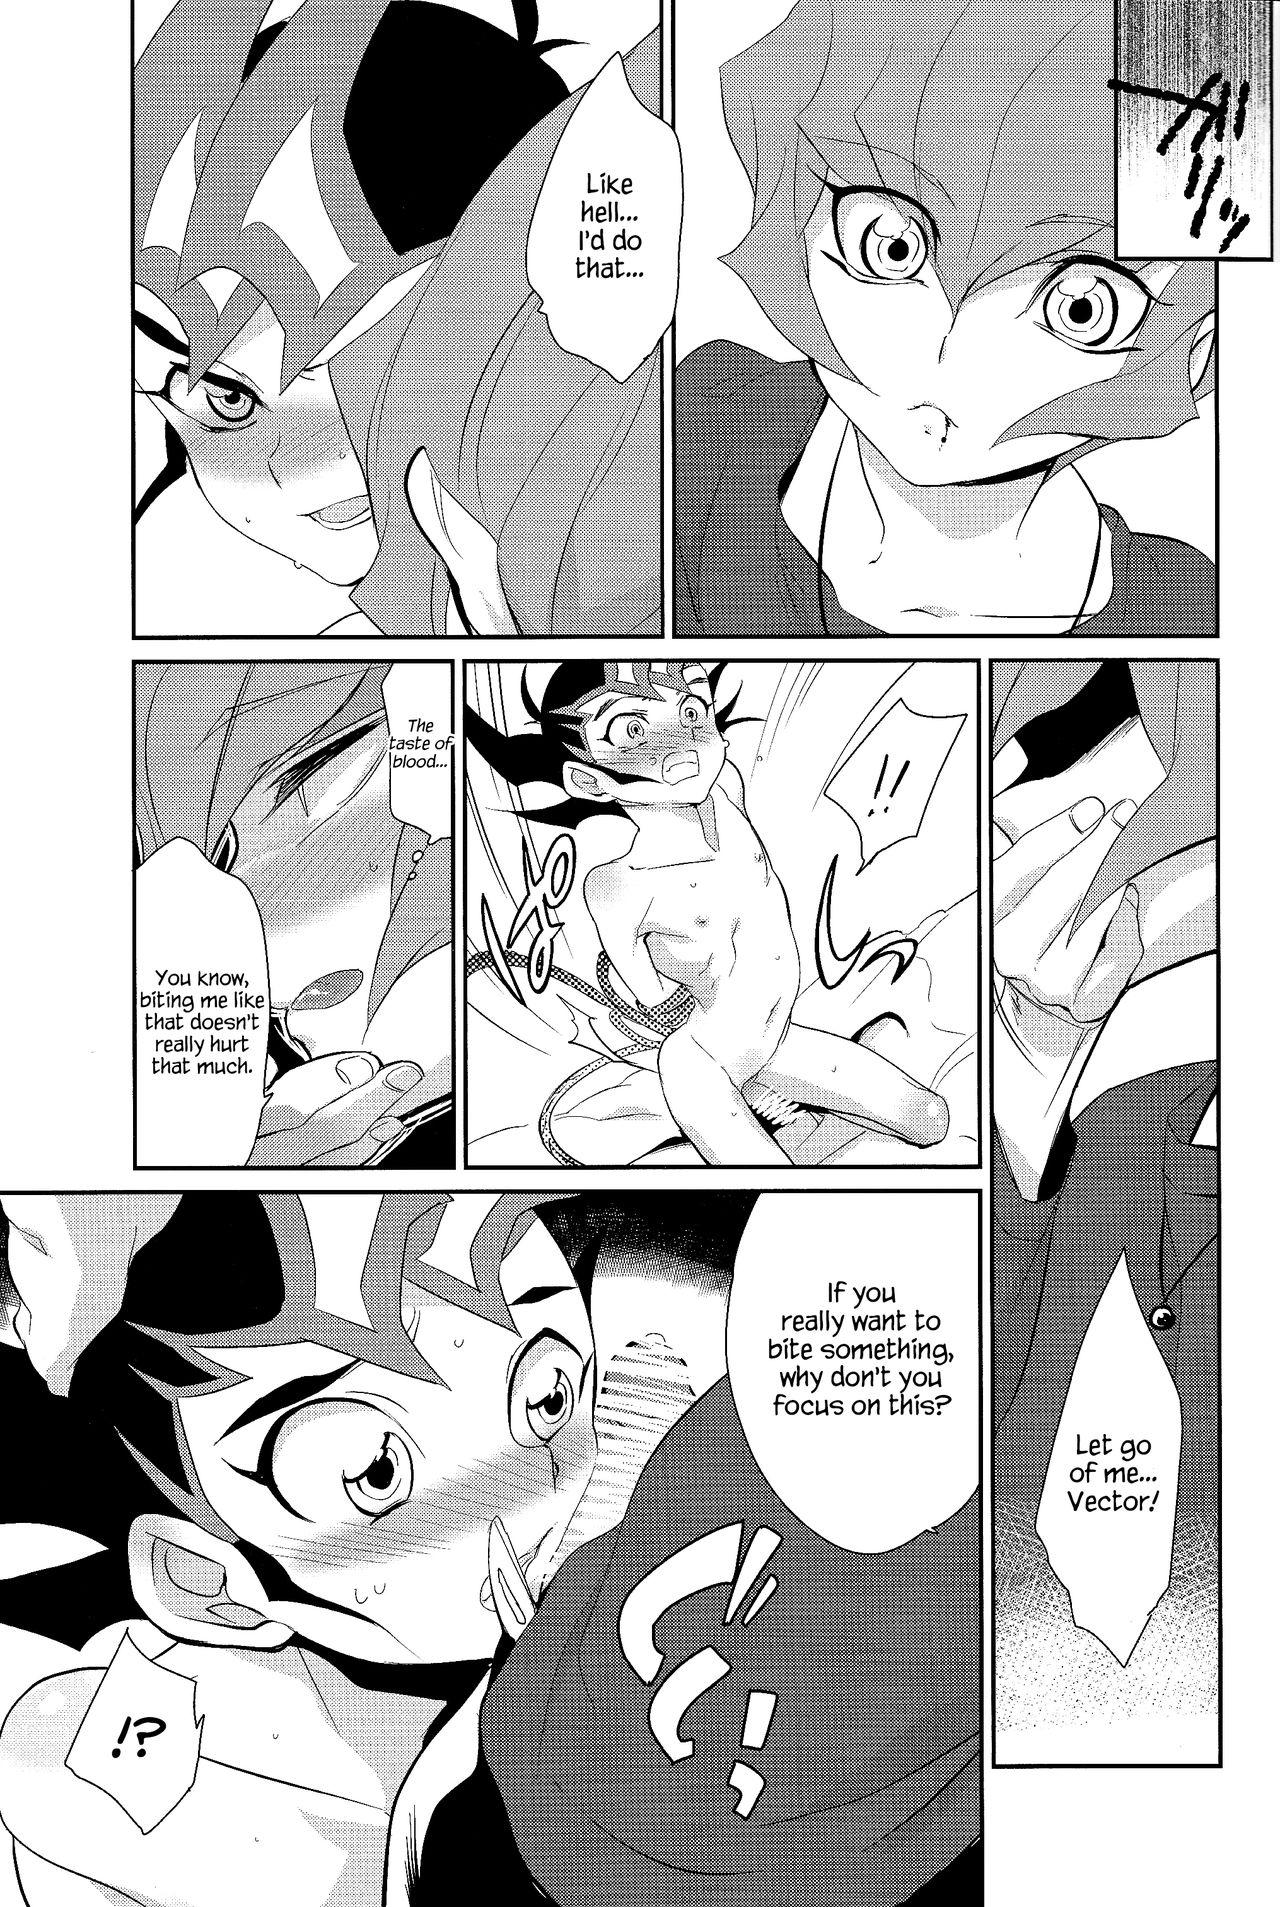 Camgirl PERFECT EATER - Yu-gi-oh zexal Rough Sex - Page 10